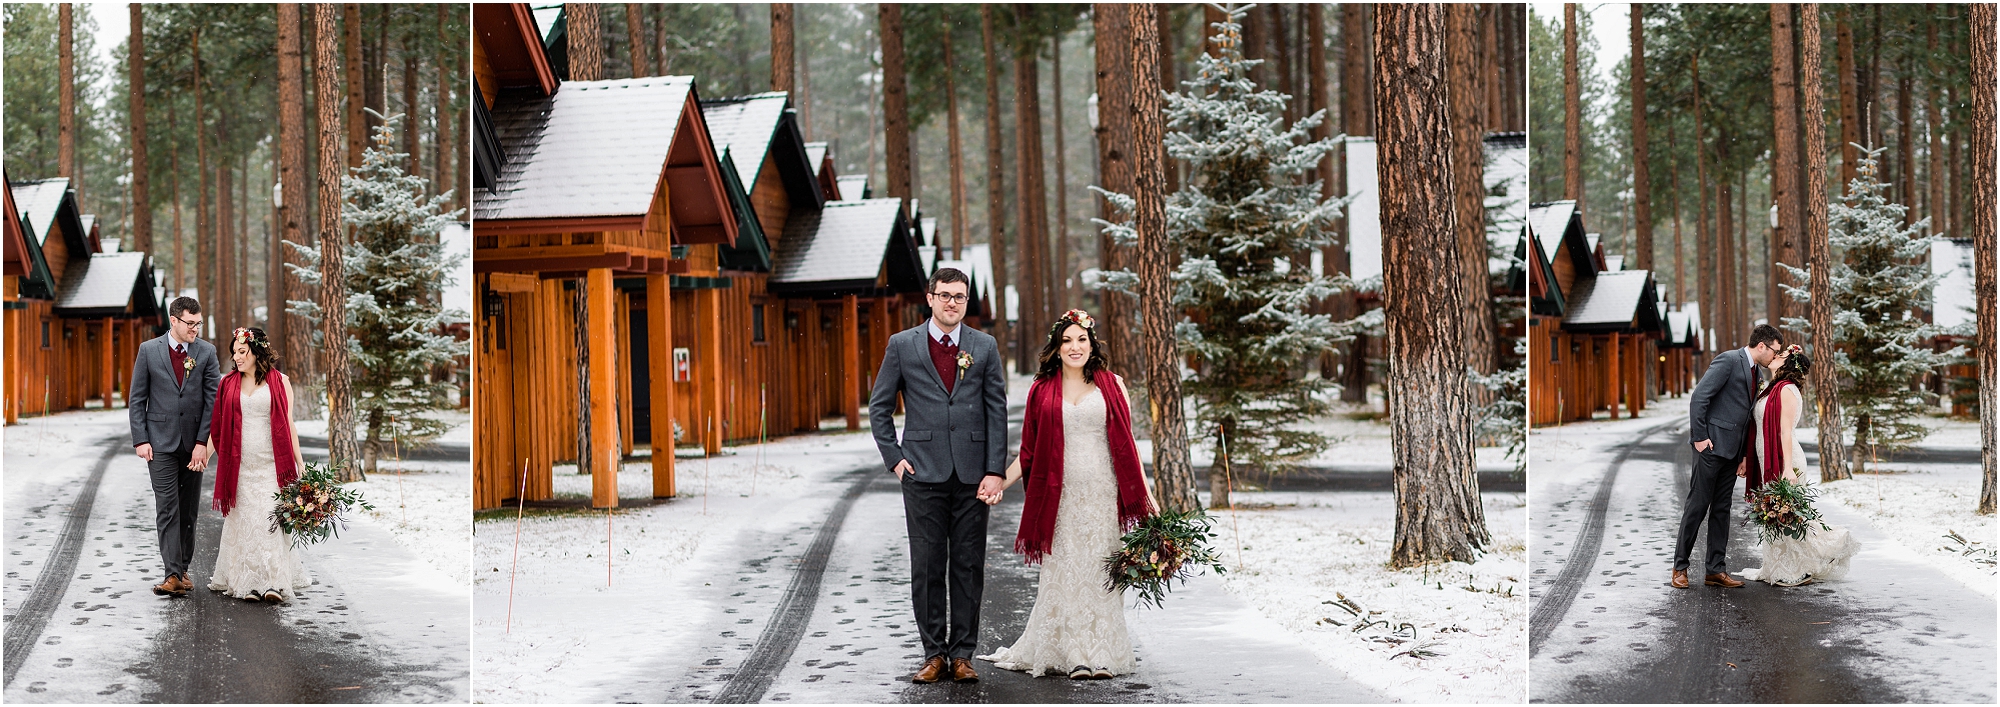 A bride, wearing a floral crown and red shawl over her white dress and a groom, wearing a gray and burgundy suit, walk hand in hand along a snow covered walkway with her bouquet hangs from her other hand at Five Pine Lodge for their Central Oregon winter elopement. | Erica Swantek Photography 